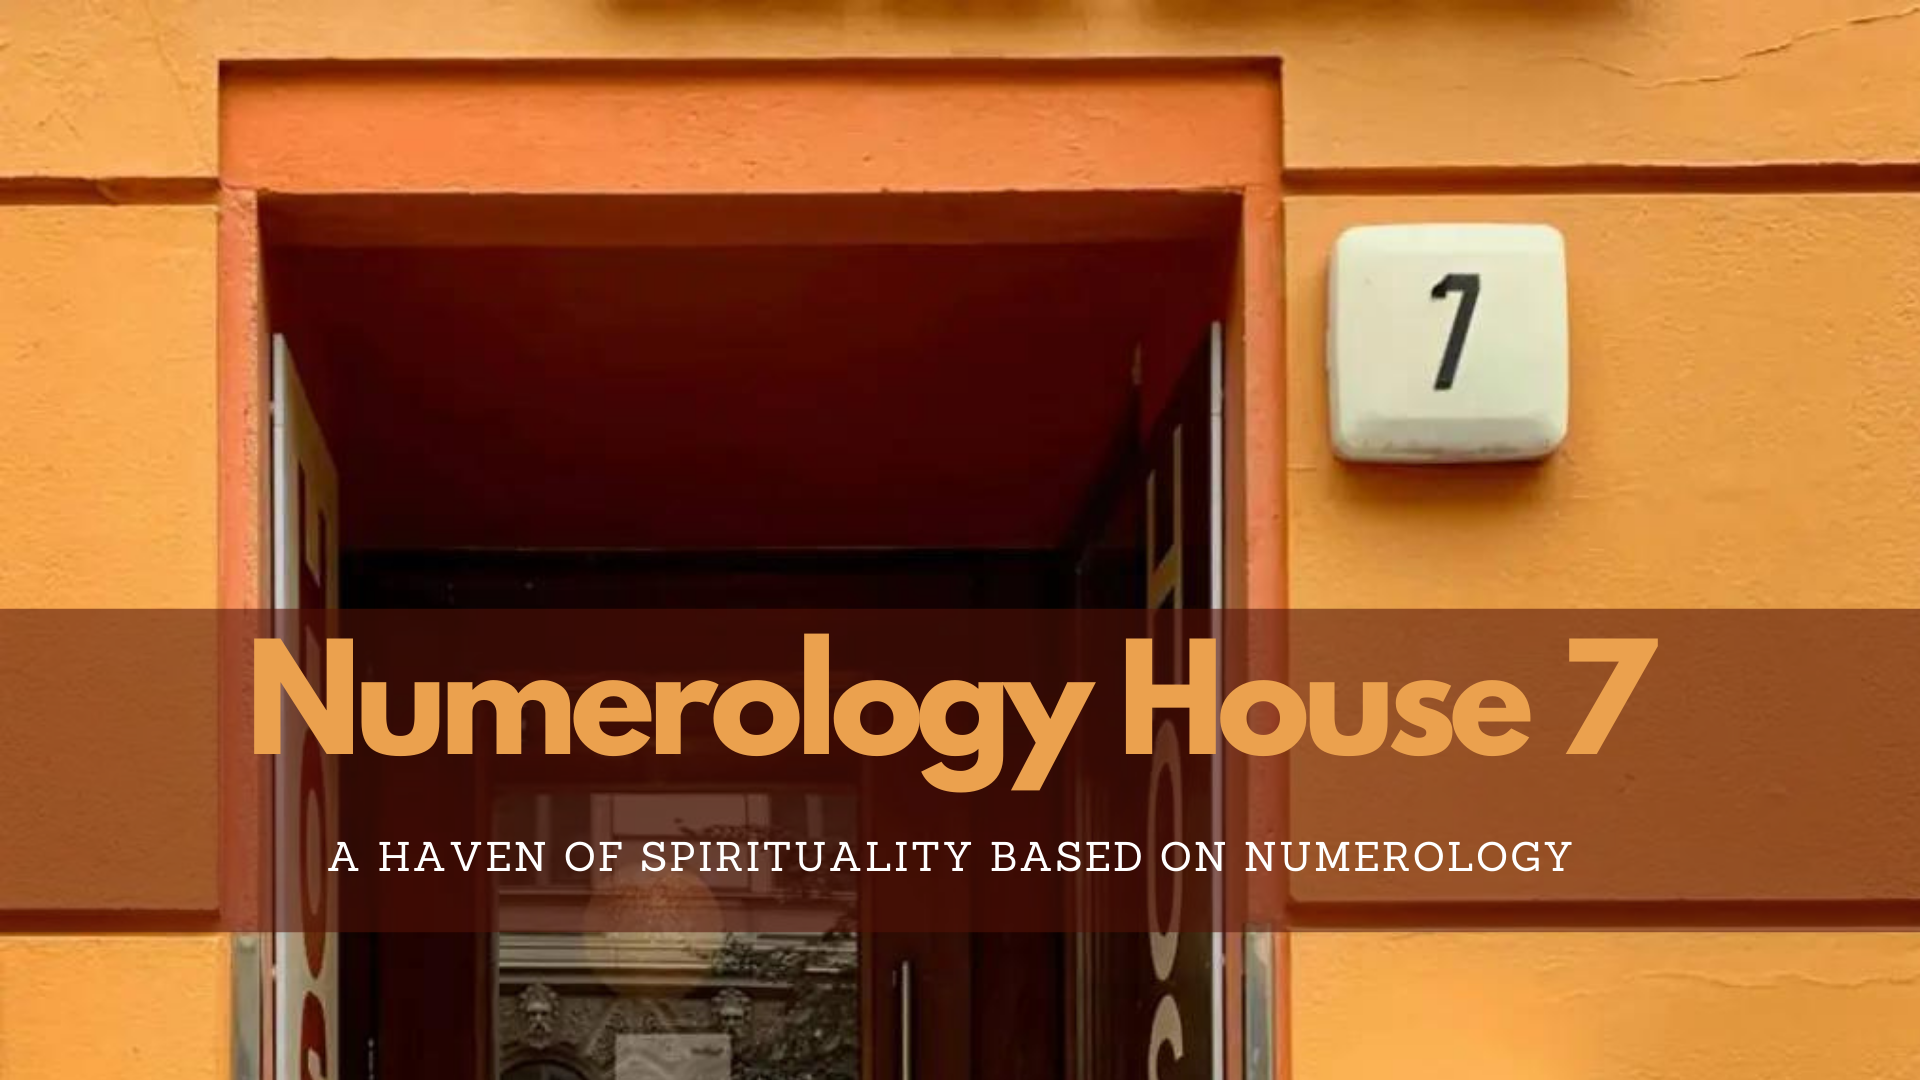 Numerology House 7 - A Haven Of Spirituality Based On Numerology